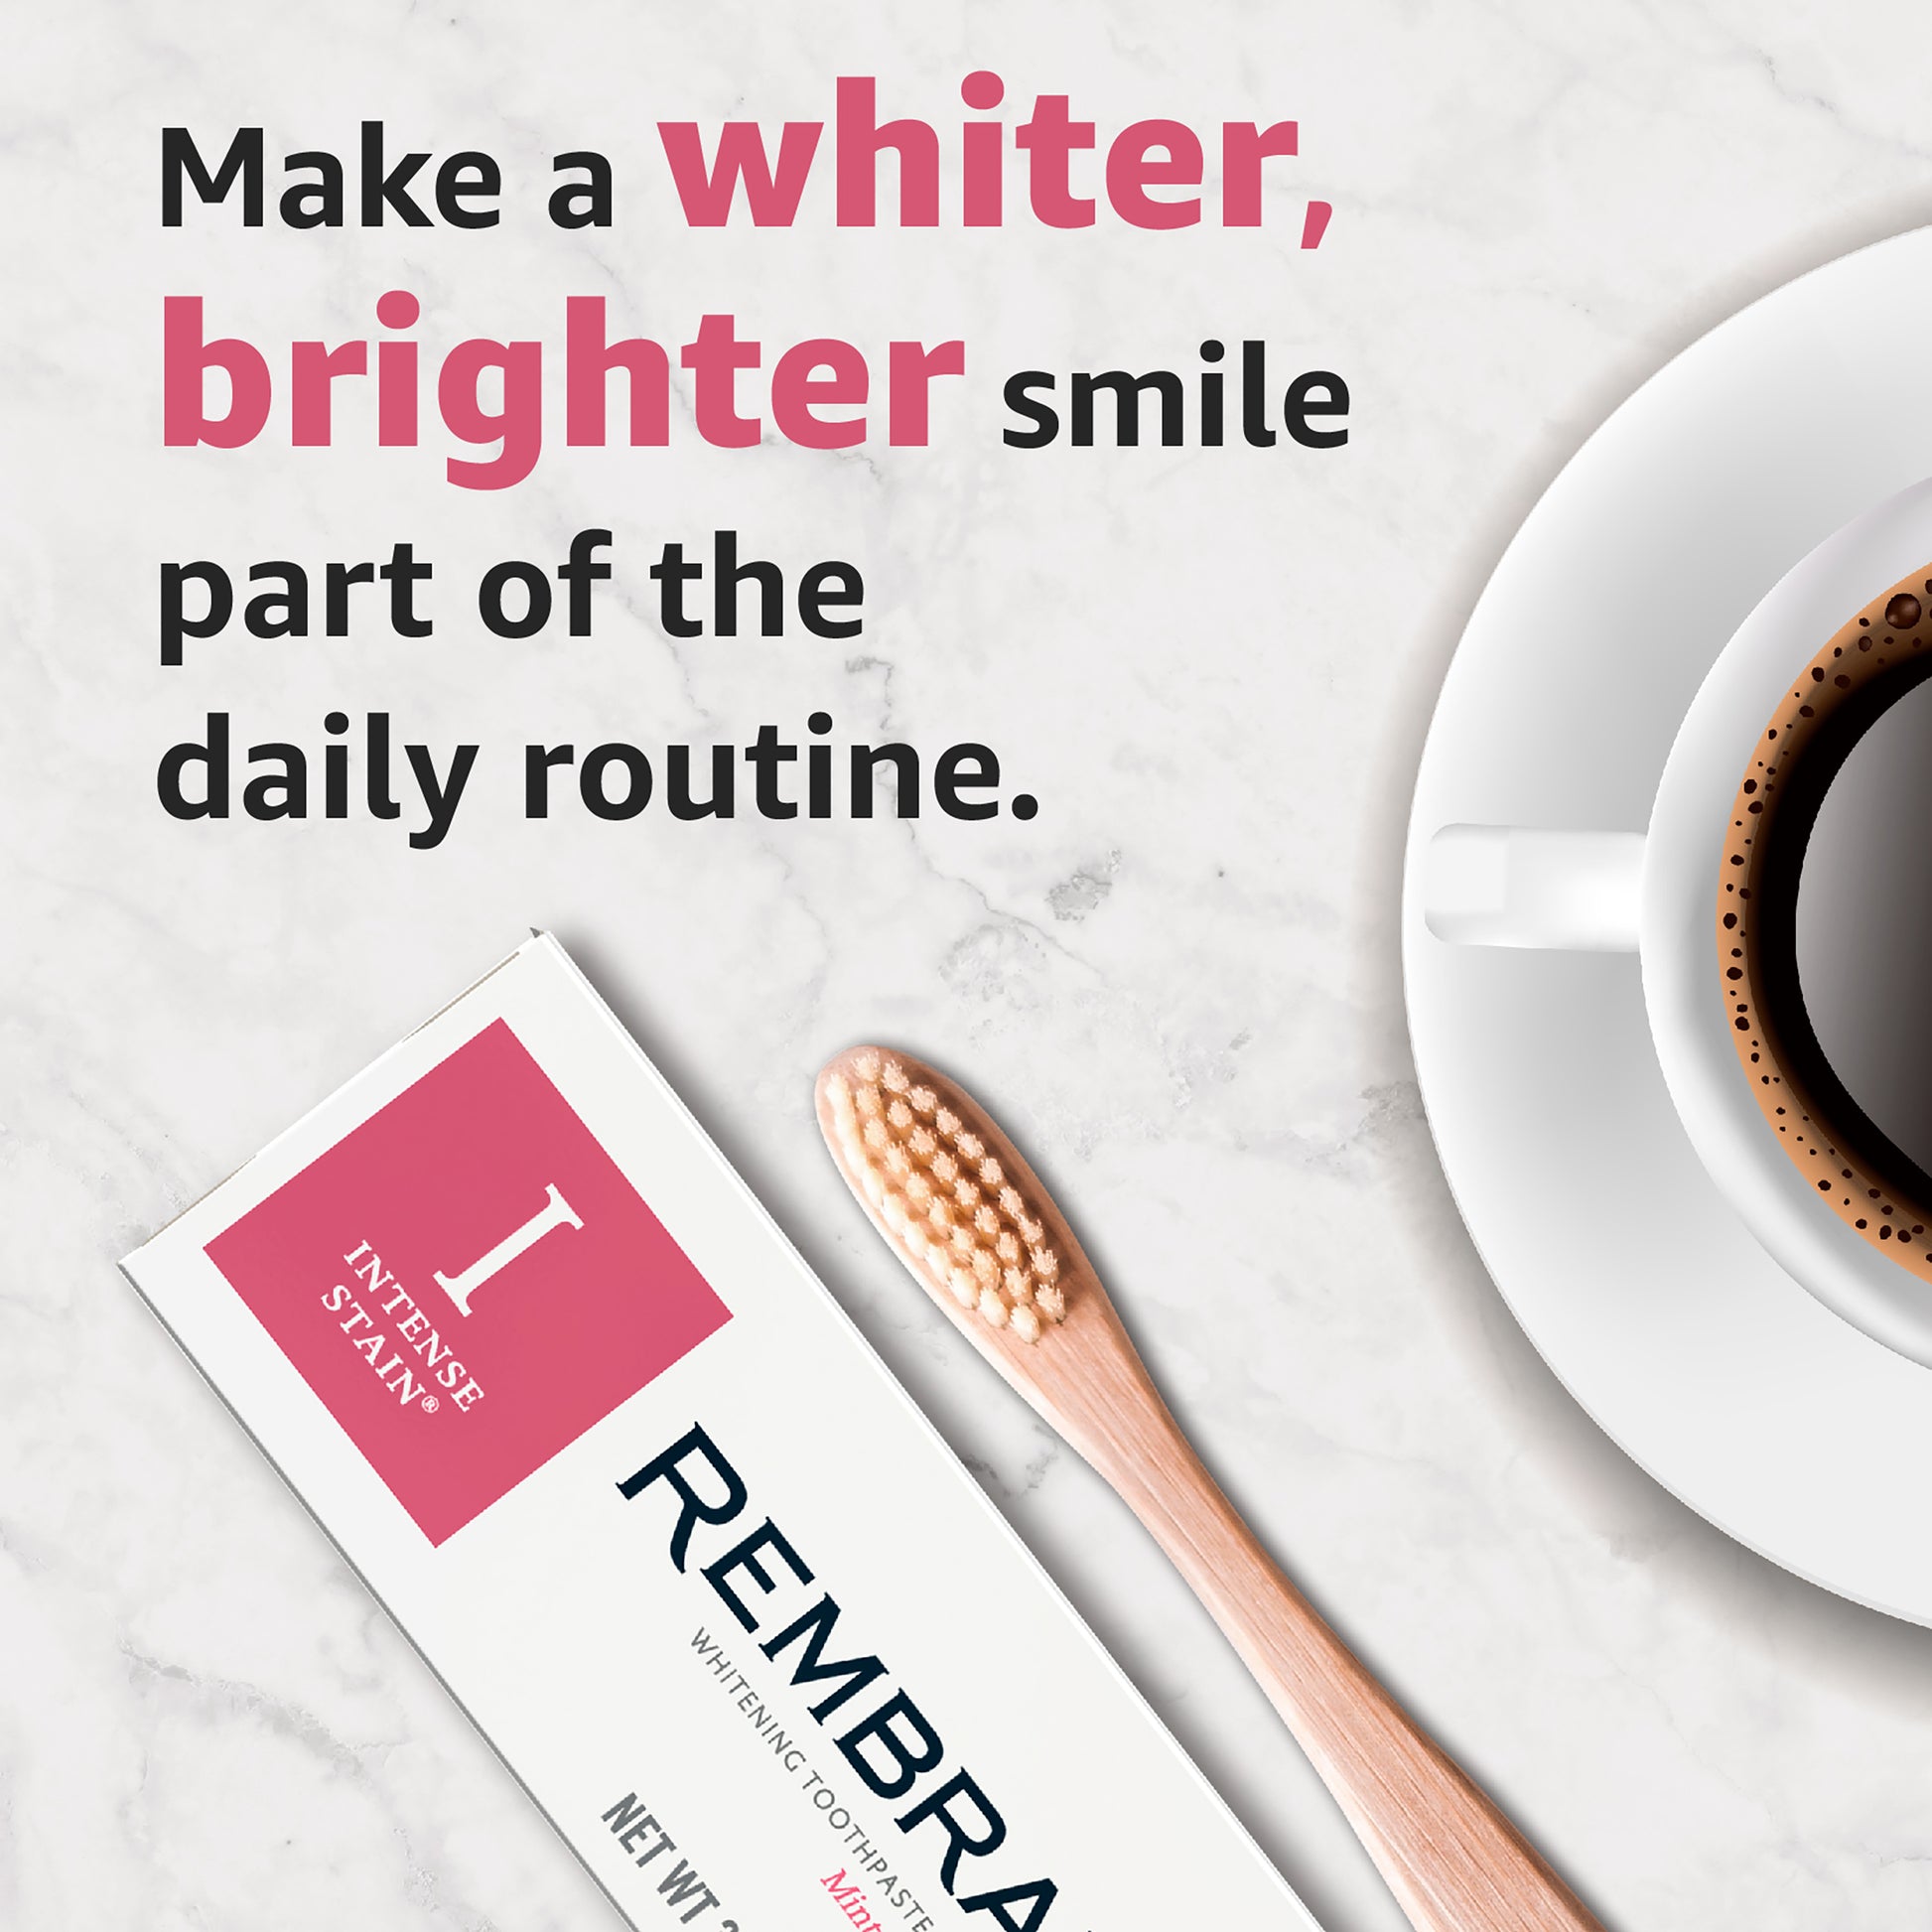 Make a whiter brighter smile part of the daily routine